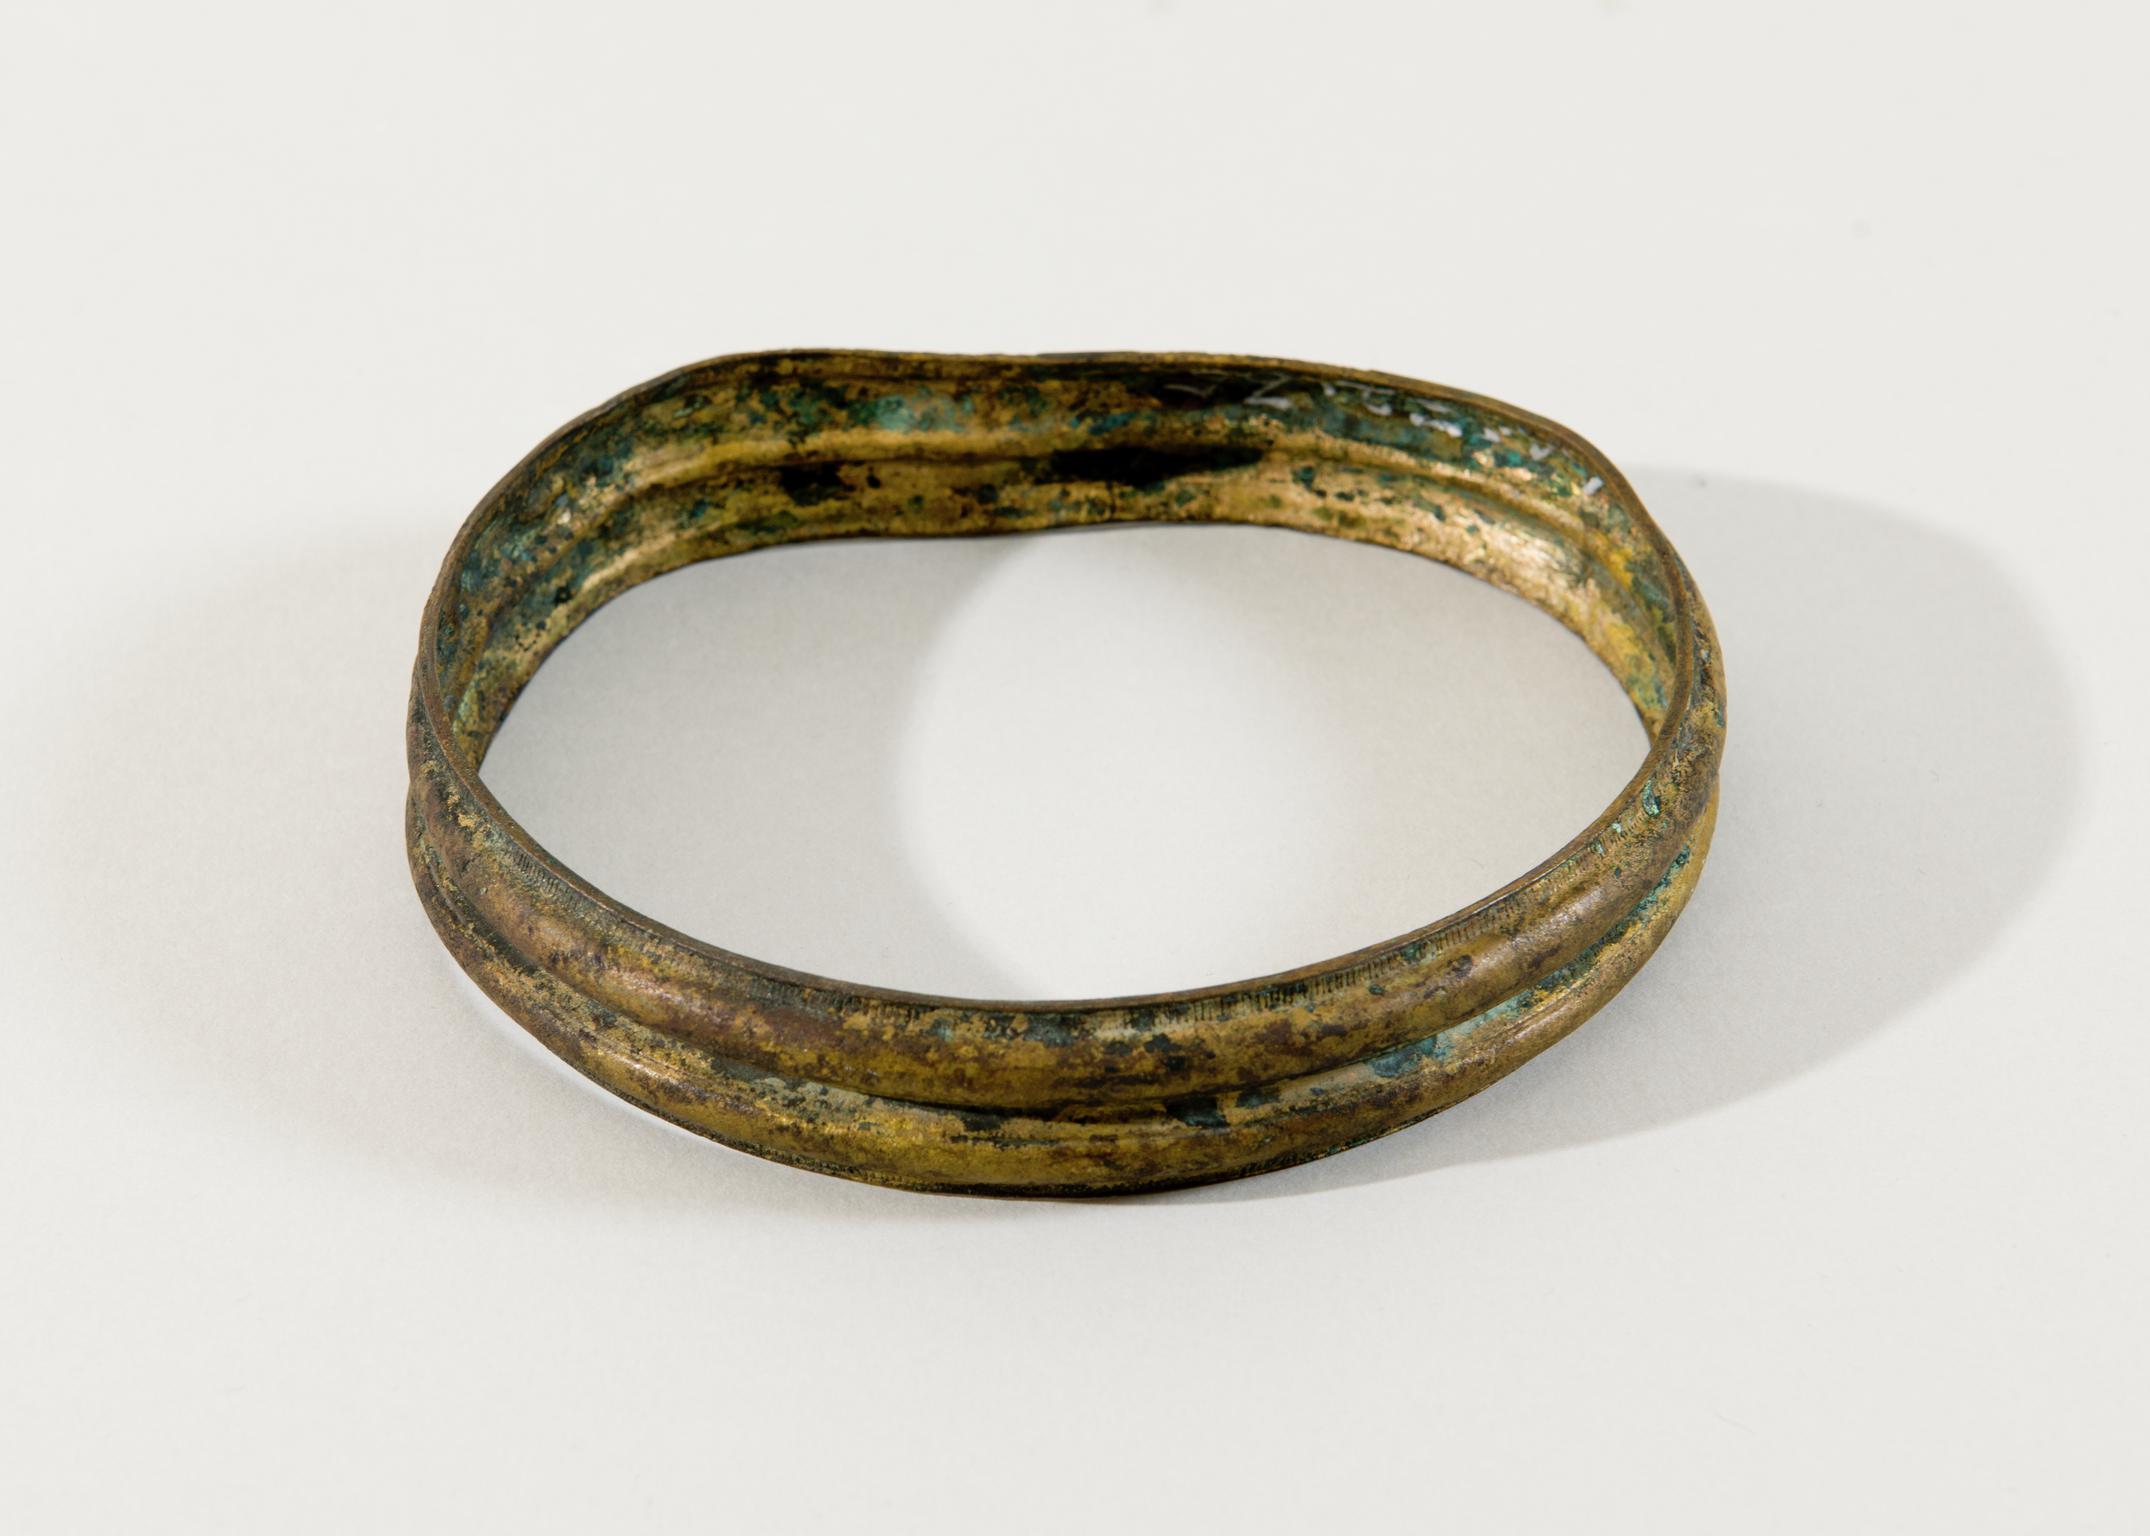 Iron Age copper alloy nave hoop